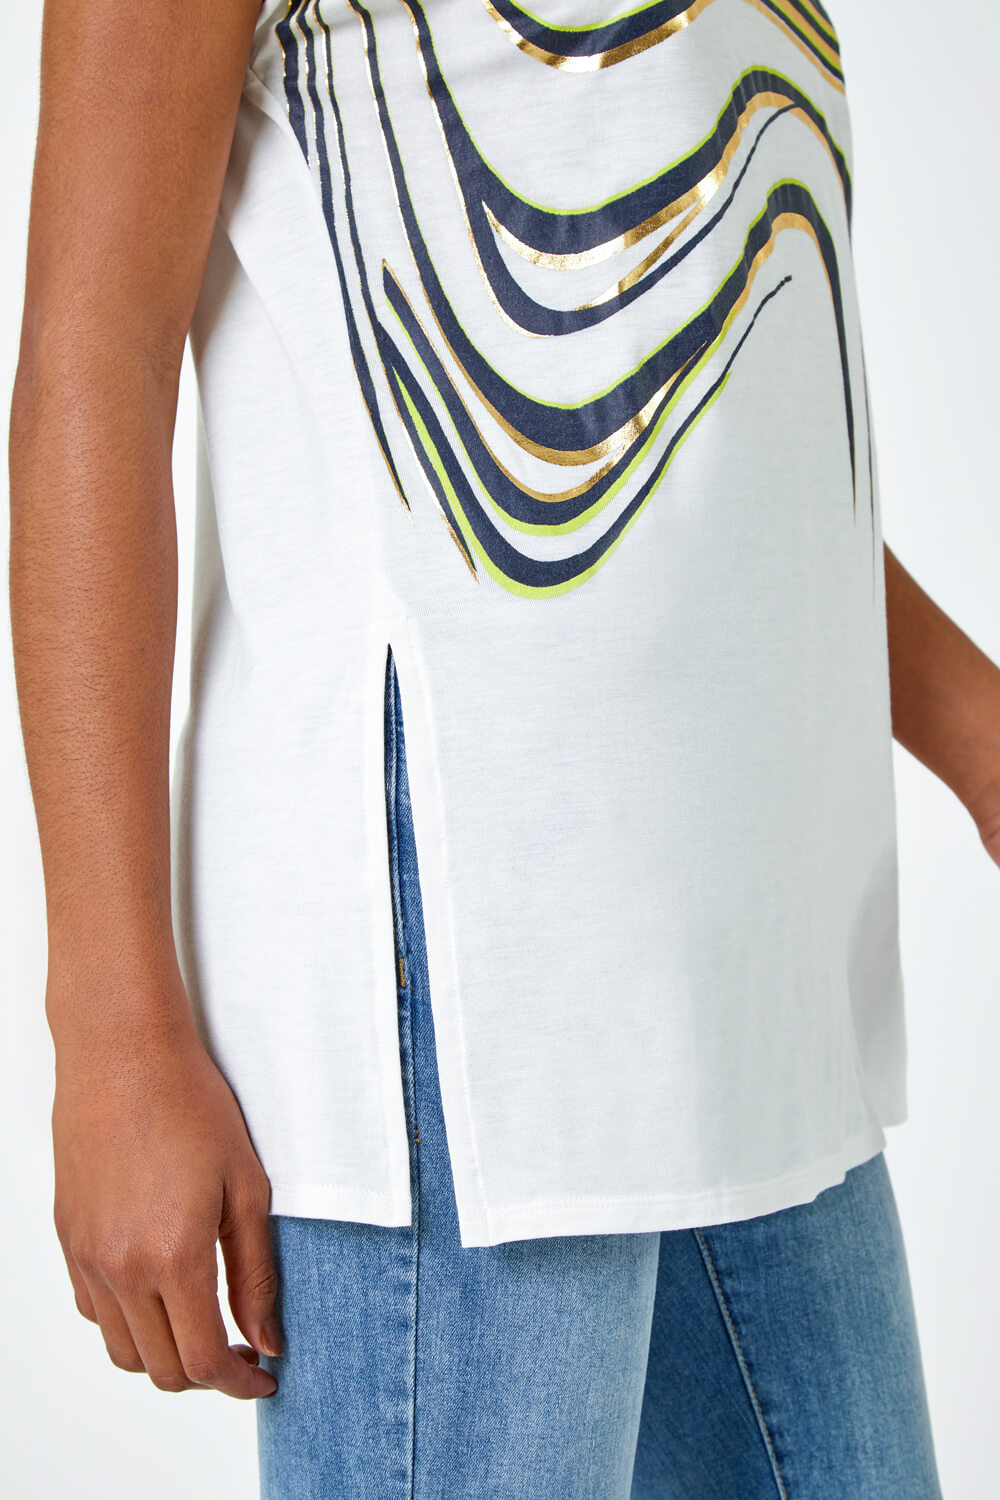 White Abstract Foil Print T-Shirt, Image 5 of 5